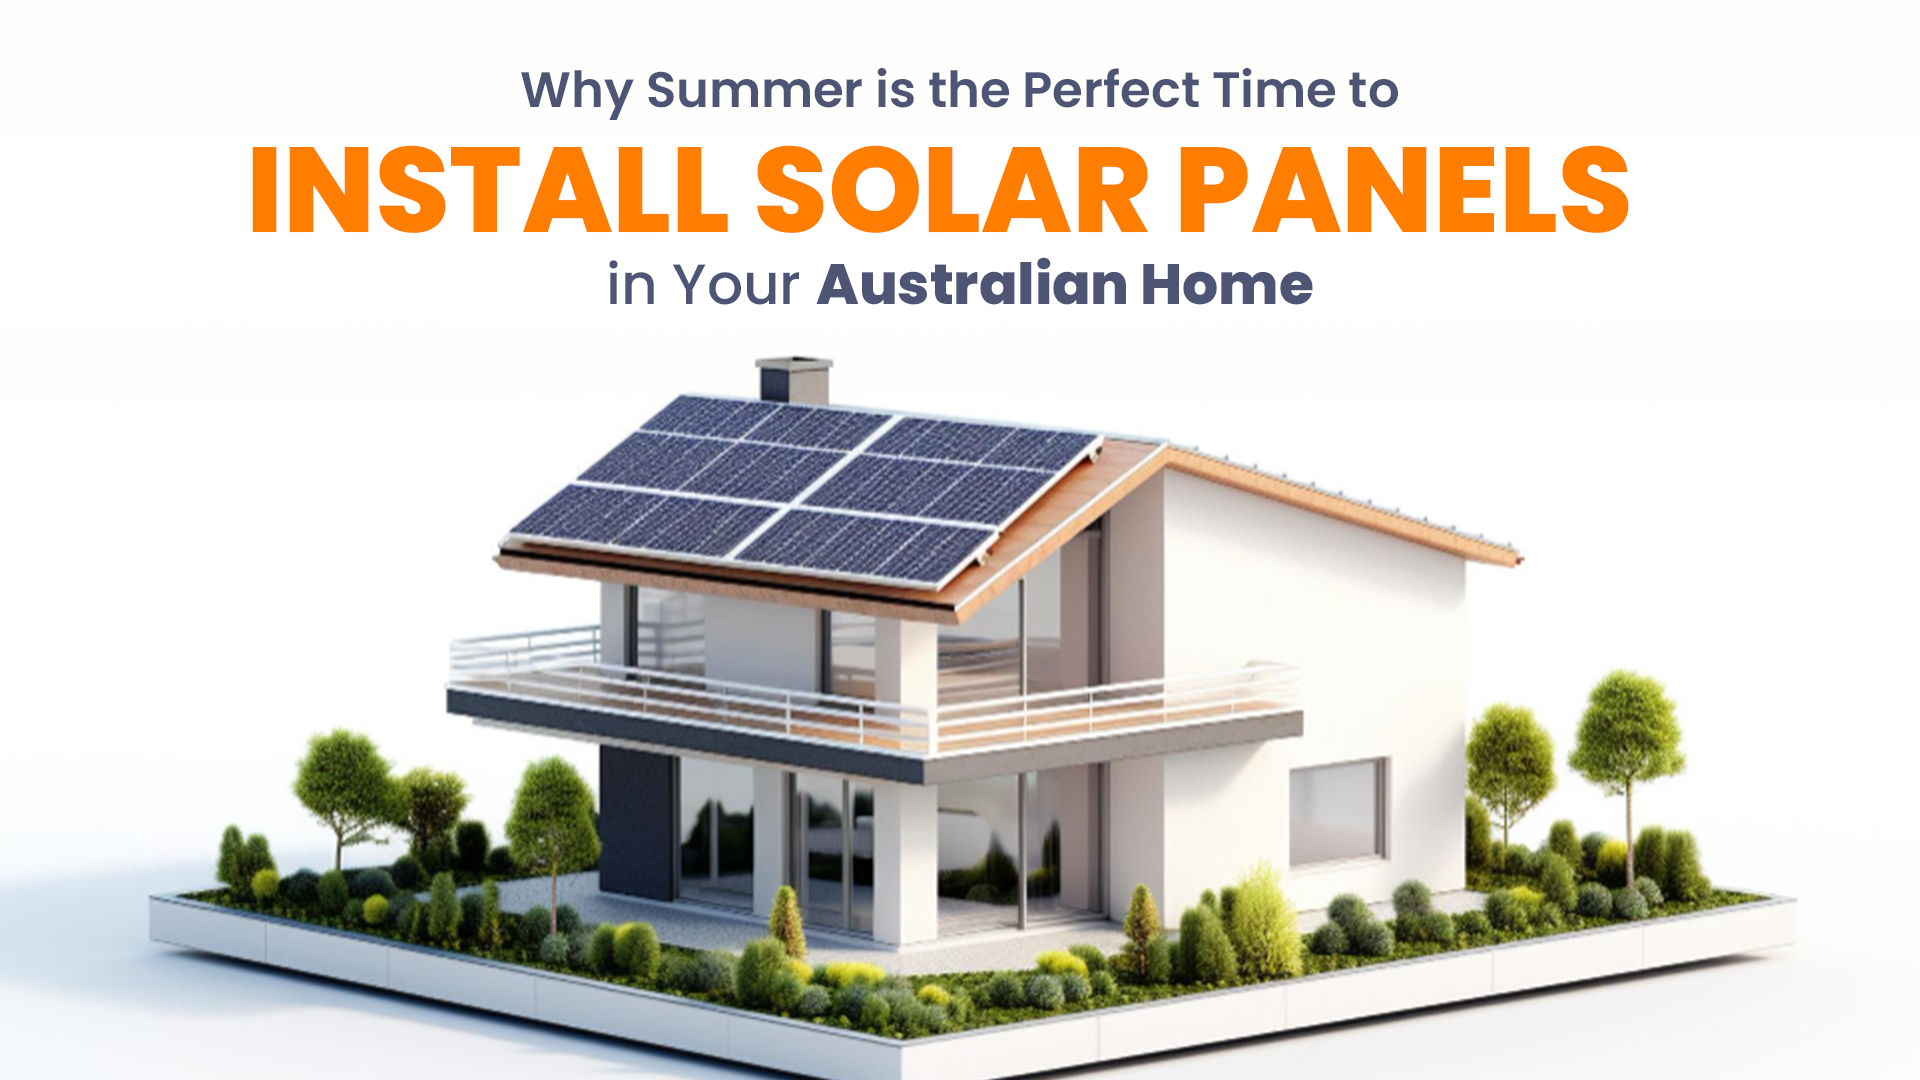 Why Summer is the Perfect Time to Install Solar Panels in Your Australian Home